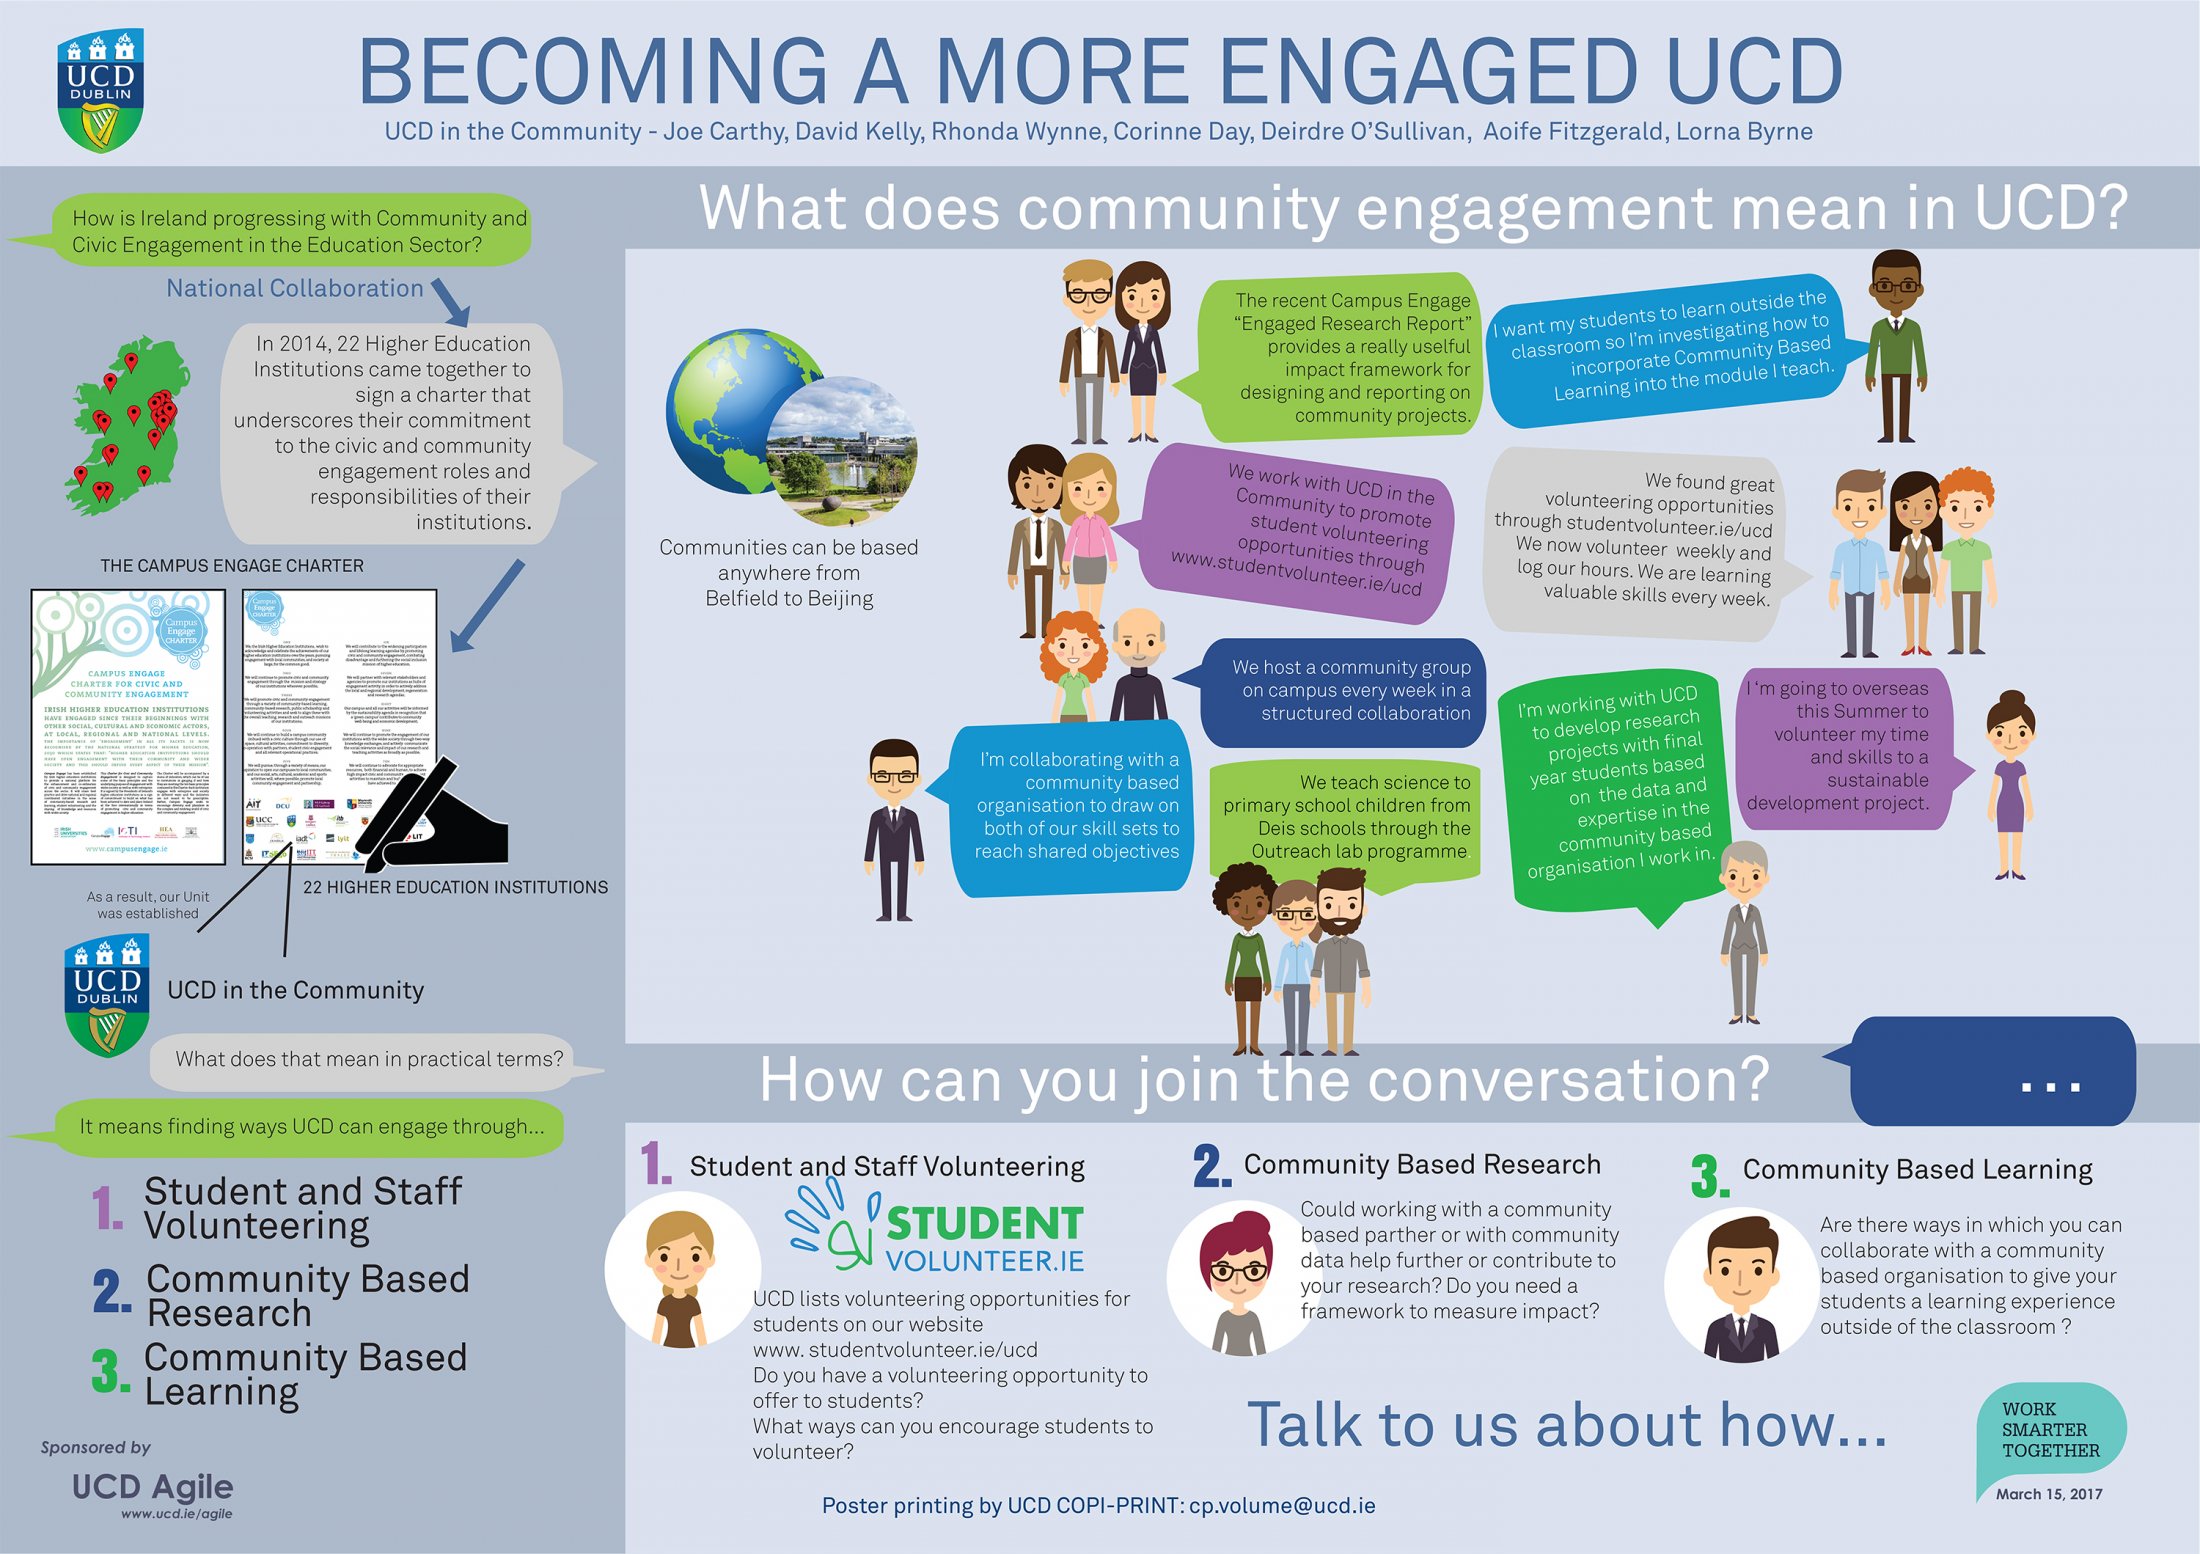 8. Becoming A More Engaged UCD